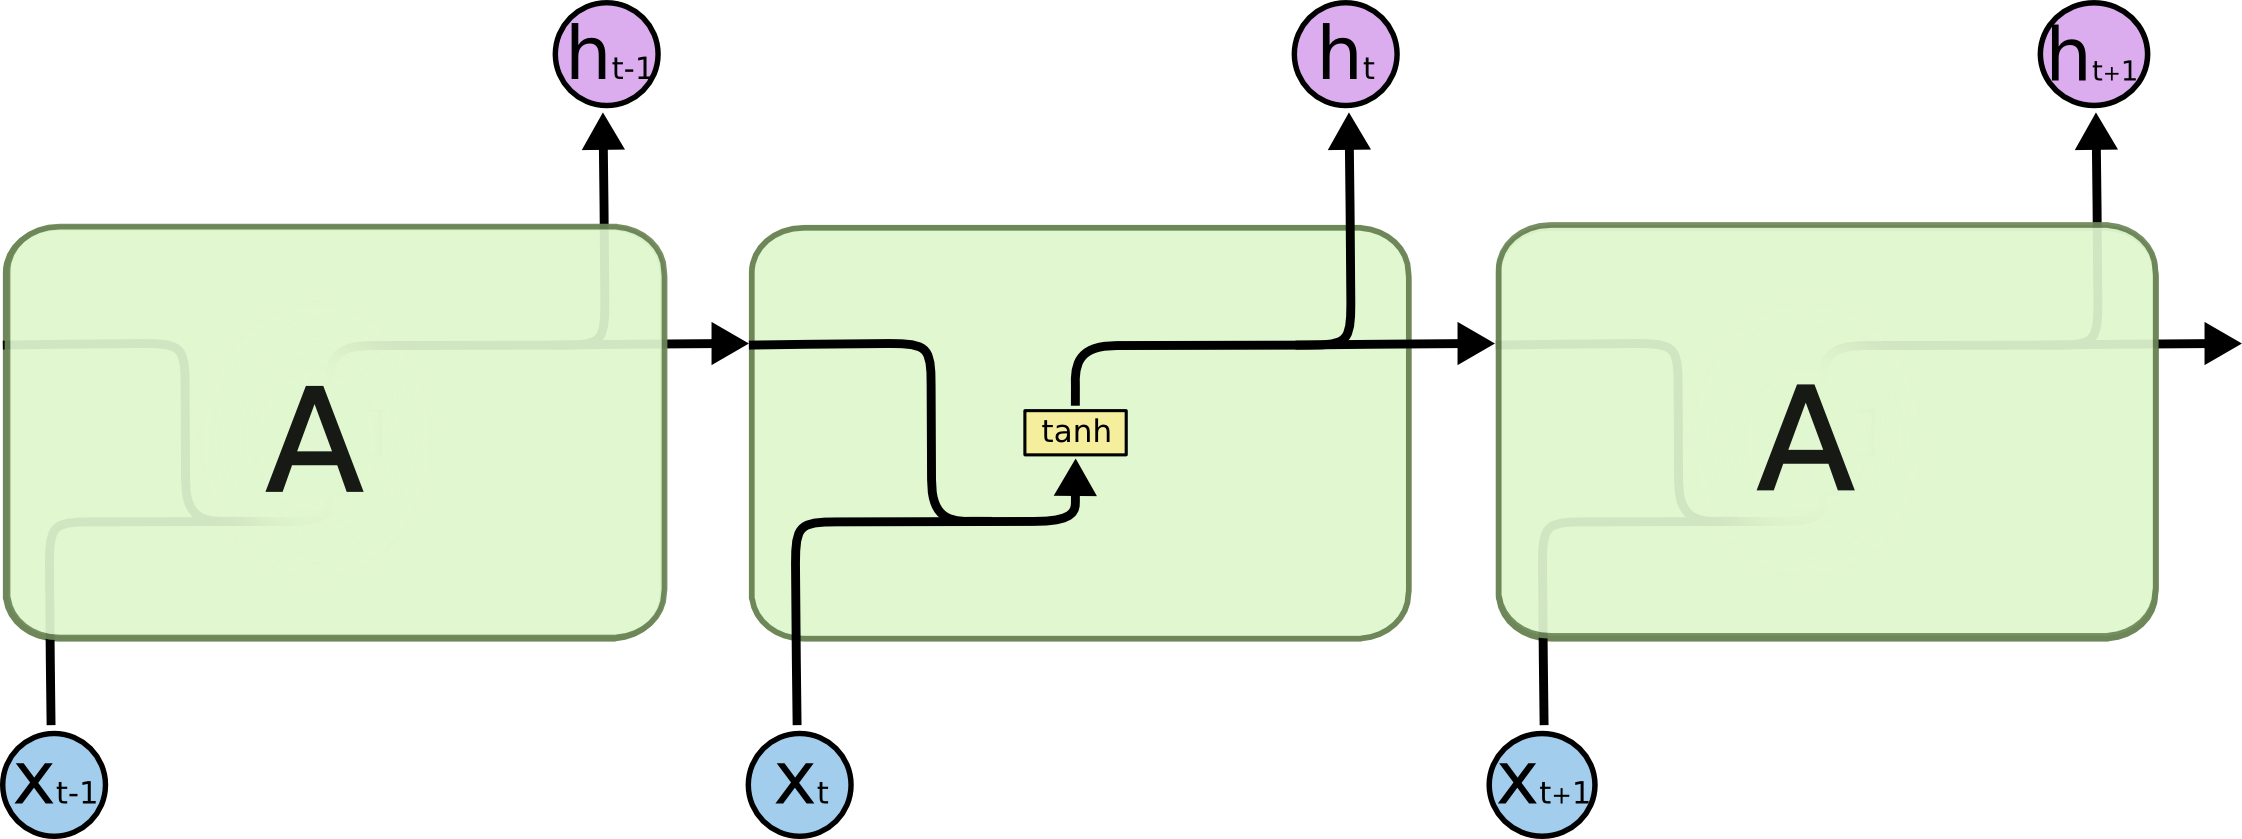 LSTM Networks 